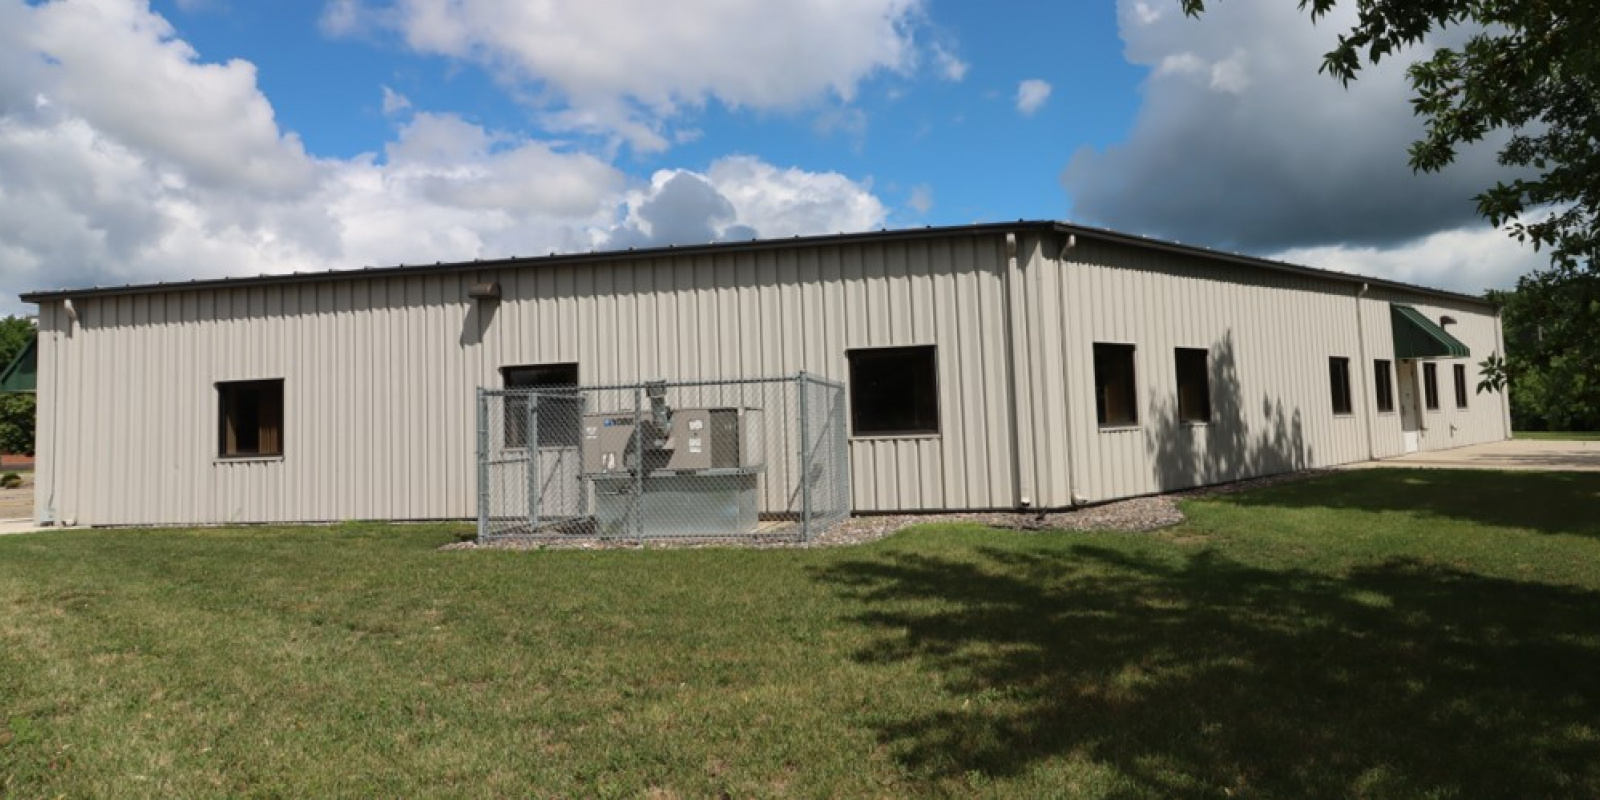 Approximately 33,000 SF industrial property situated on +/-1.80 acres available for lease in Sauk Rapids, MN